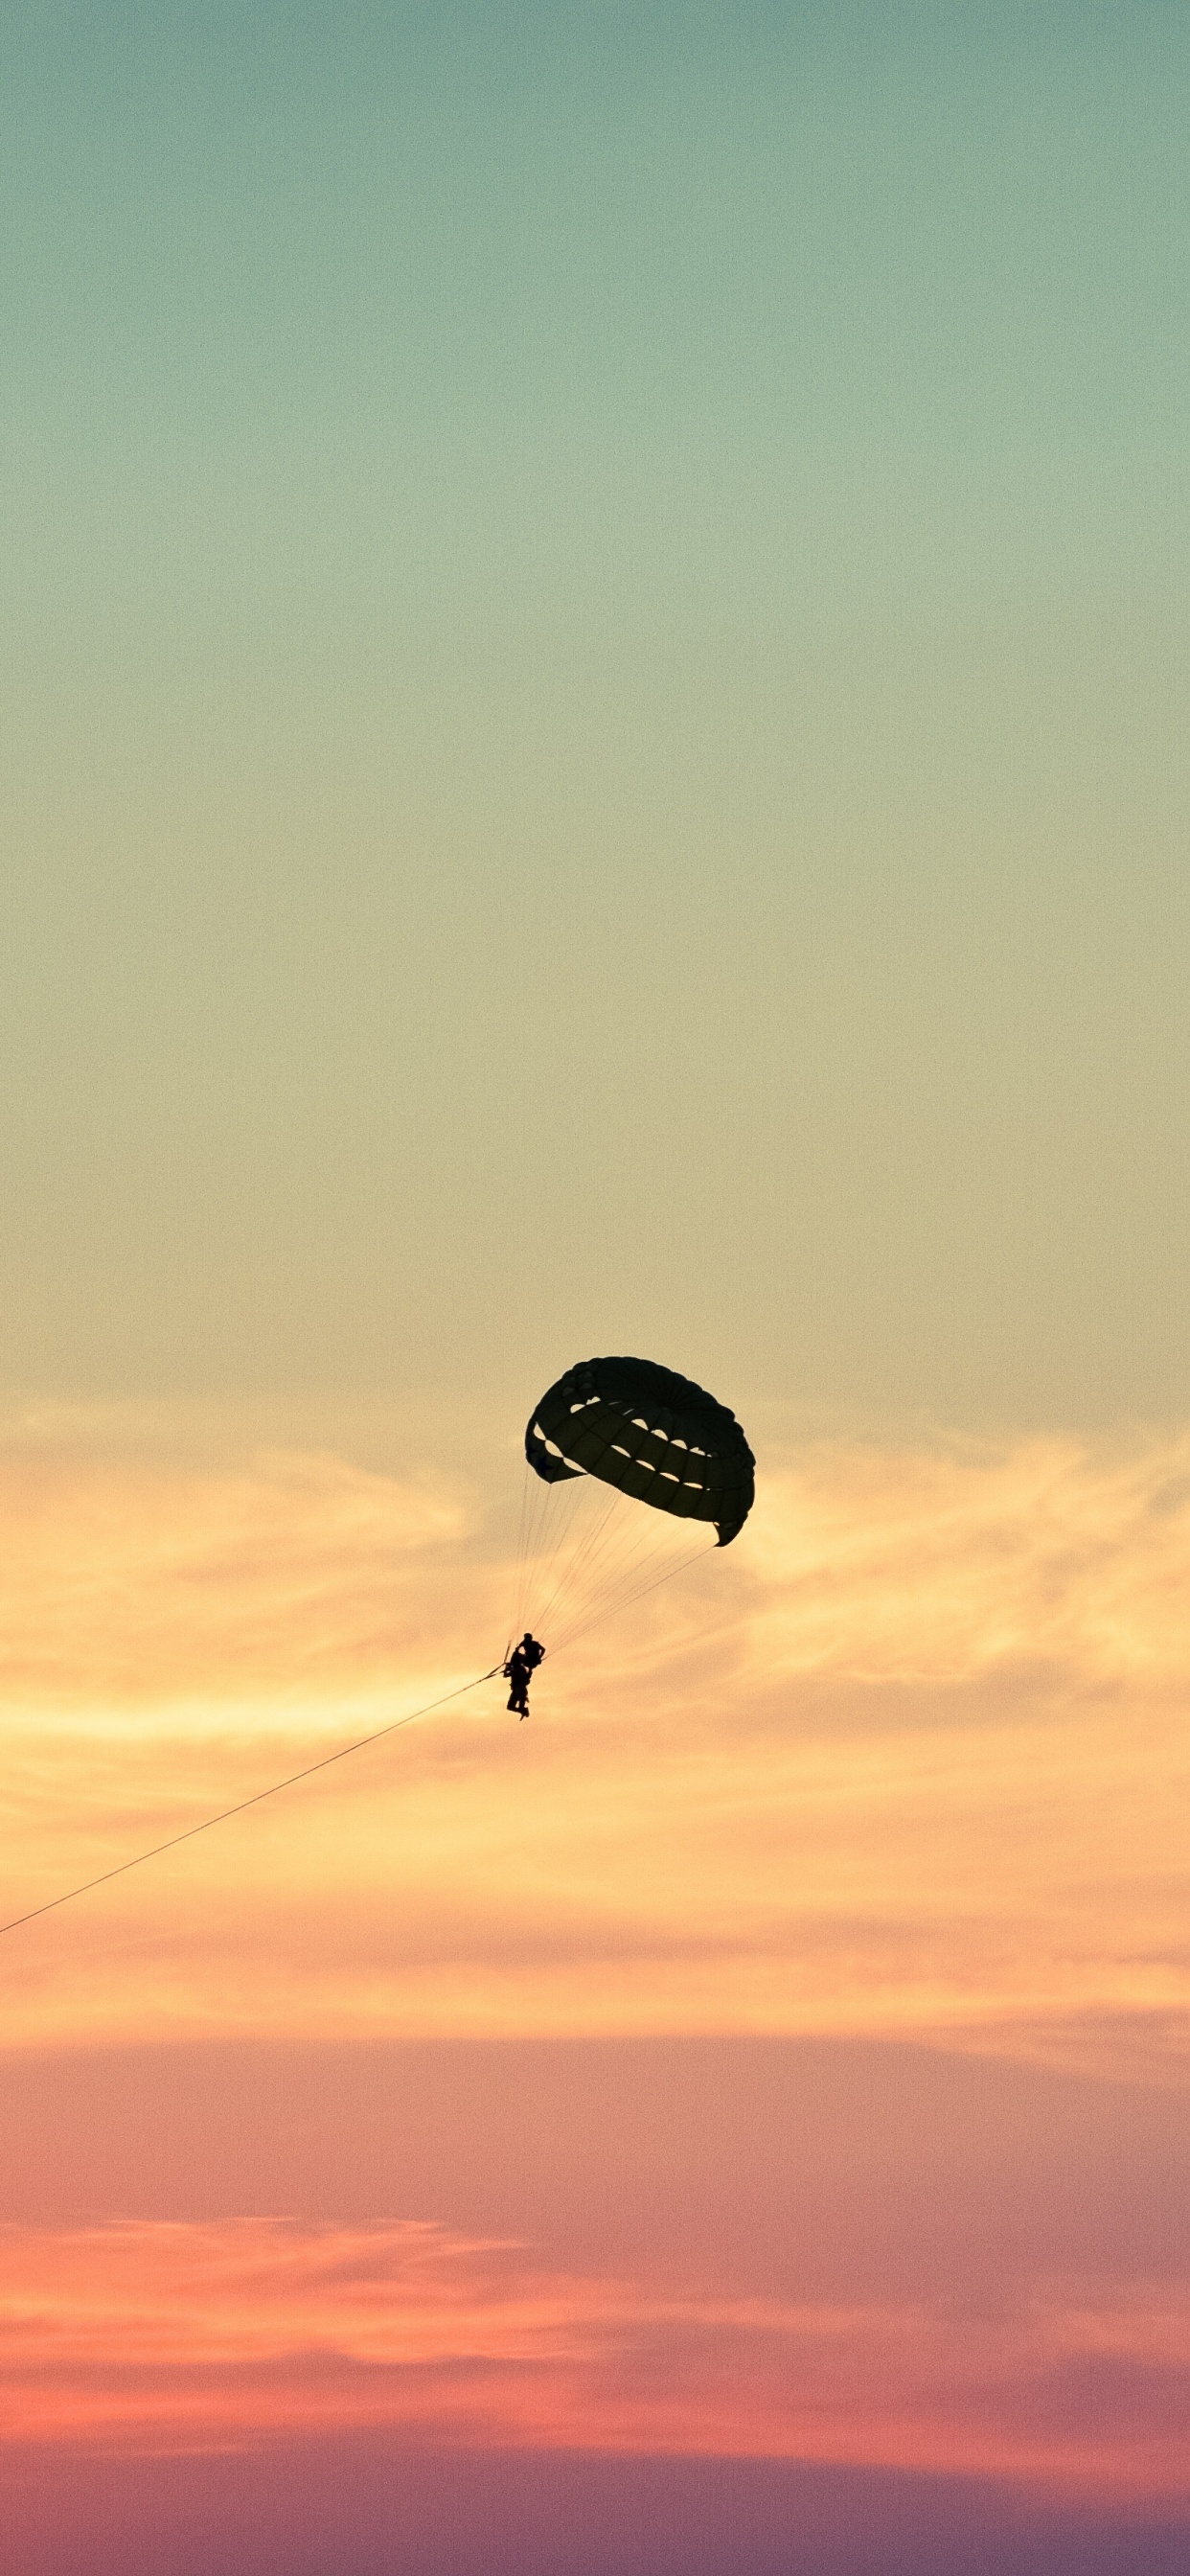 Person in Parachute Under Blue Sky During Daytime. Wallpaper in 1242x2688 Resolution